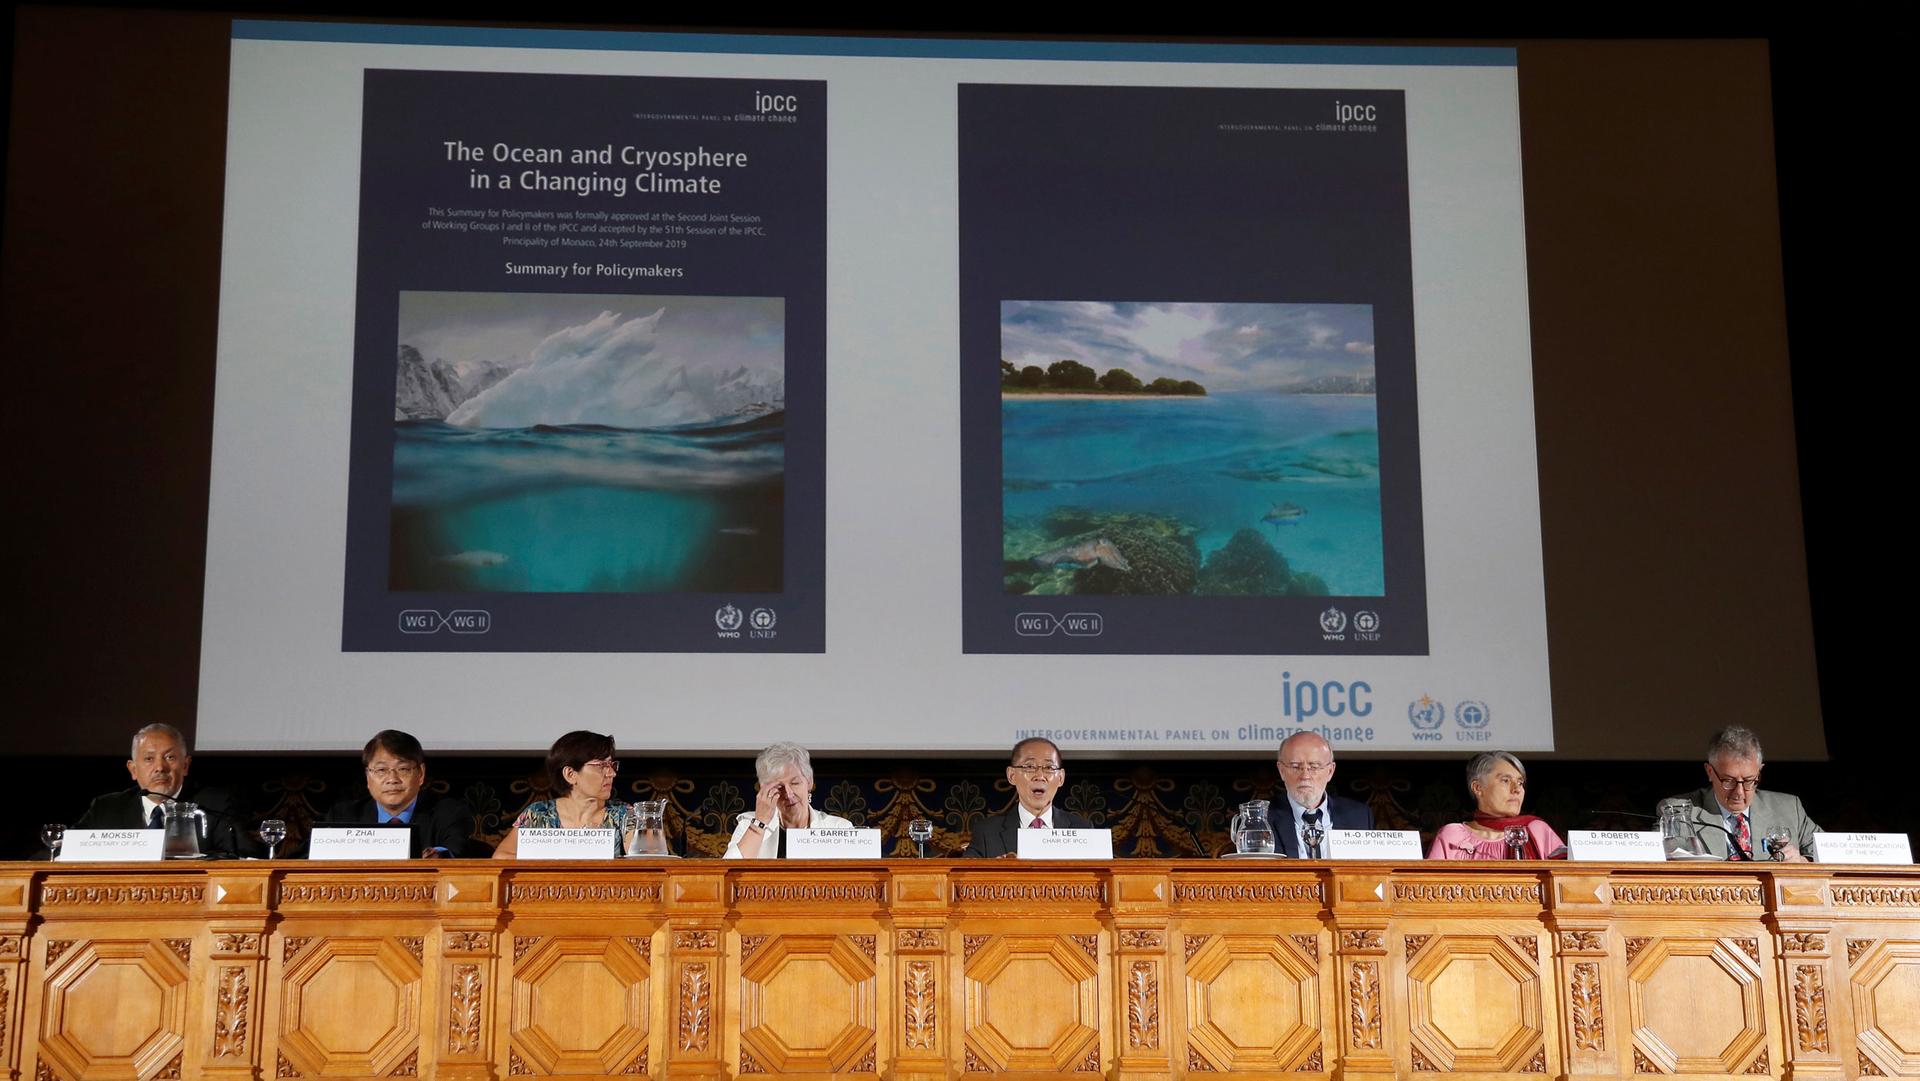 Chair of IPCC Hoesung Lee presents Monaco's Prince Albert II with the special report on the Ocean and Cryosphere in a Changing Climate Context at UN in New York.